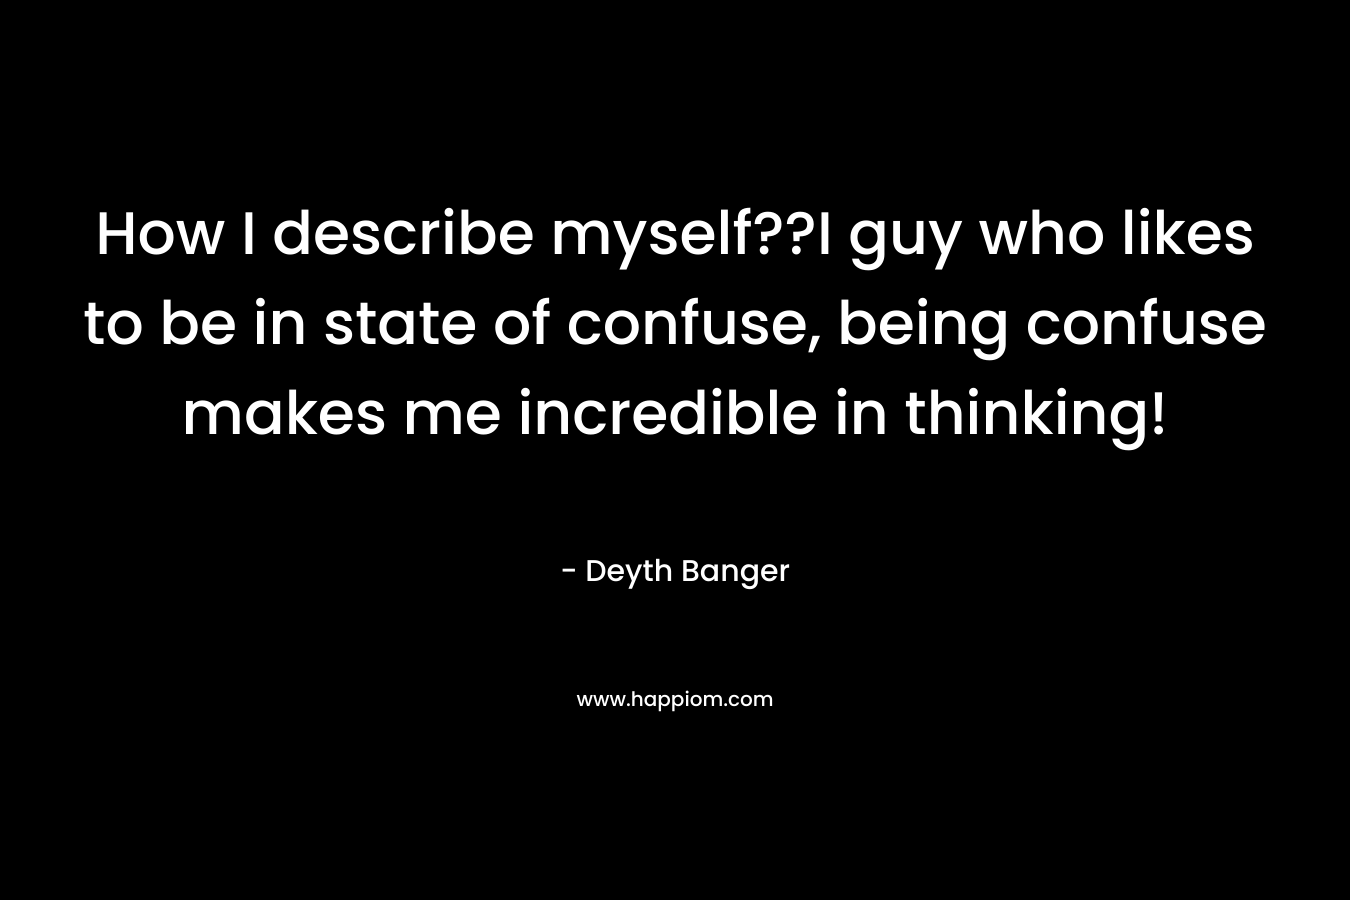 How I describe myself??I guy who likes to be in state of confuse, being confuse makes me incredible in thinking!